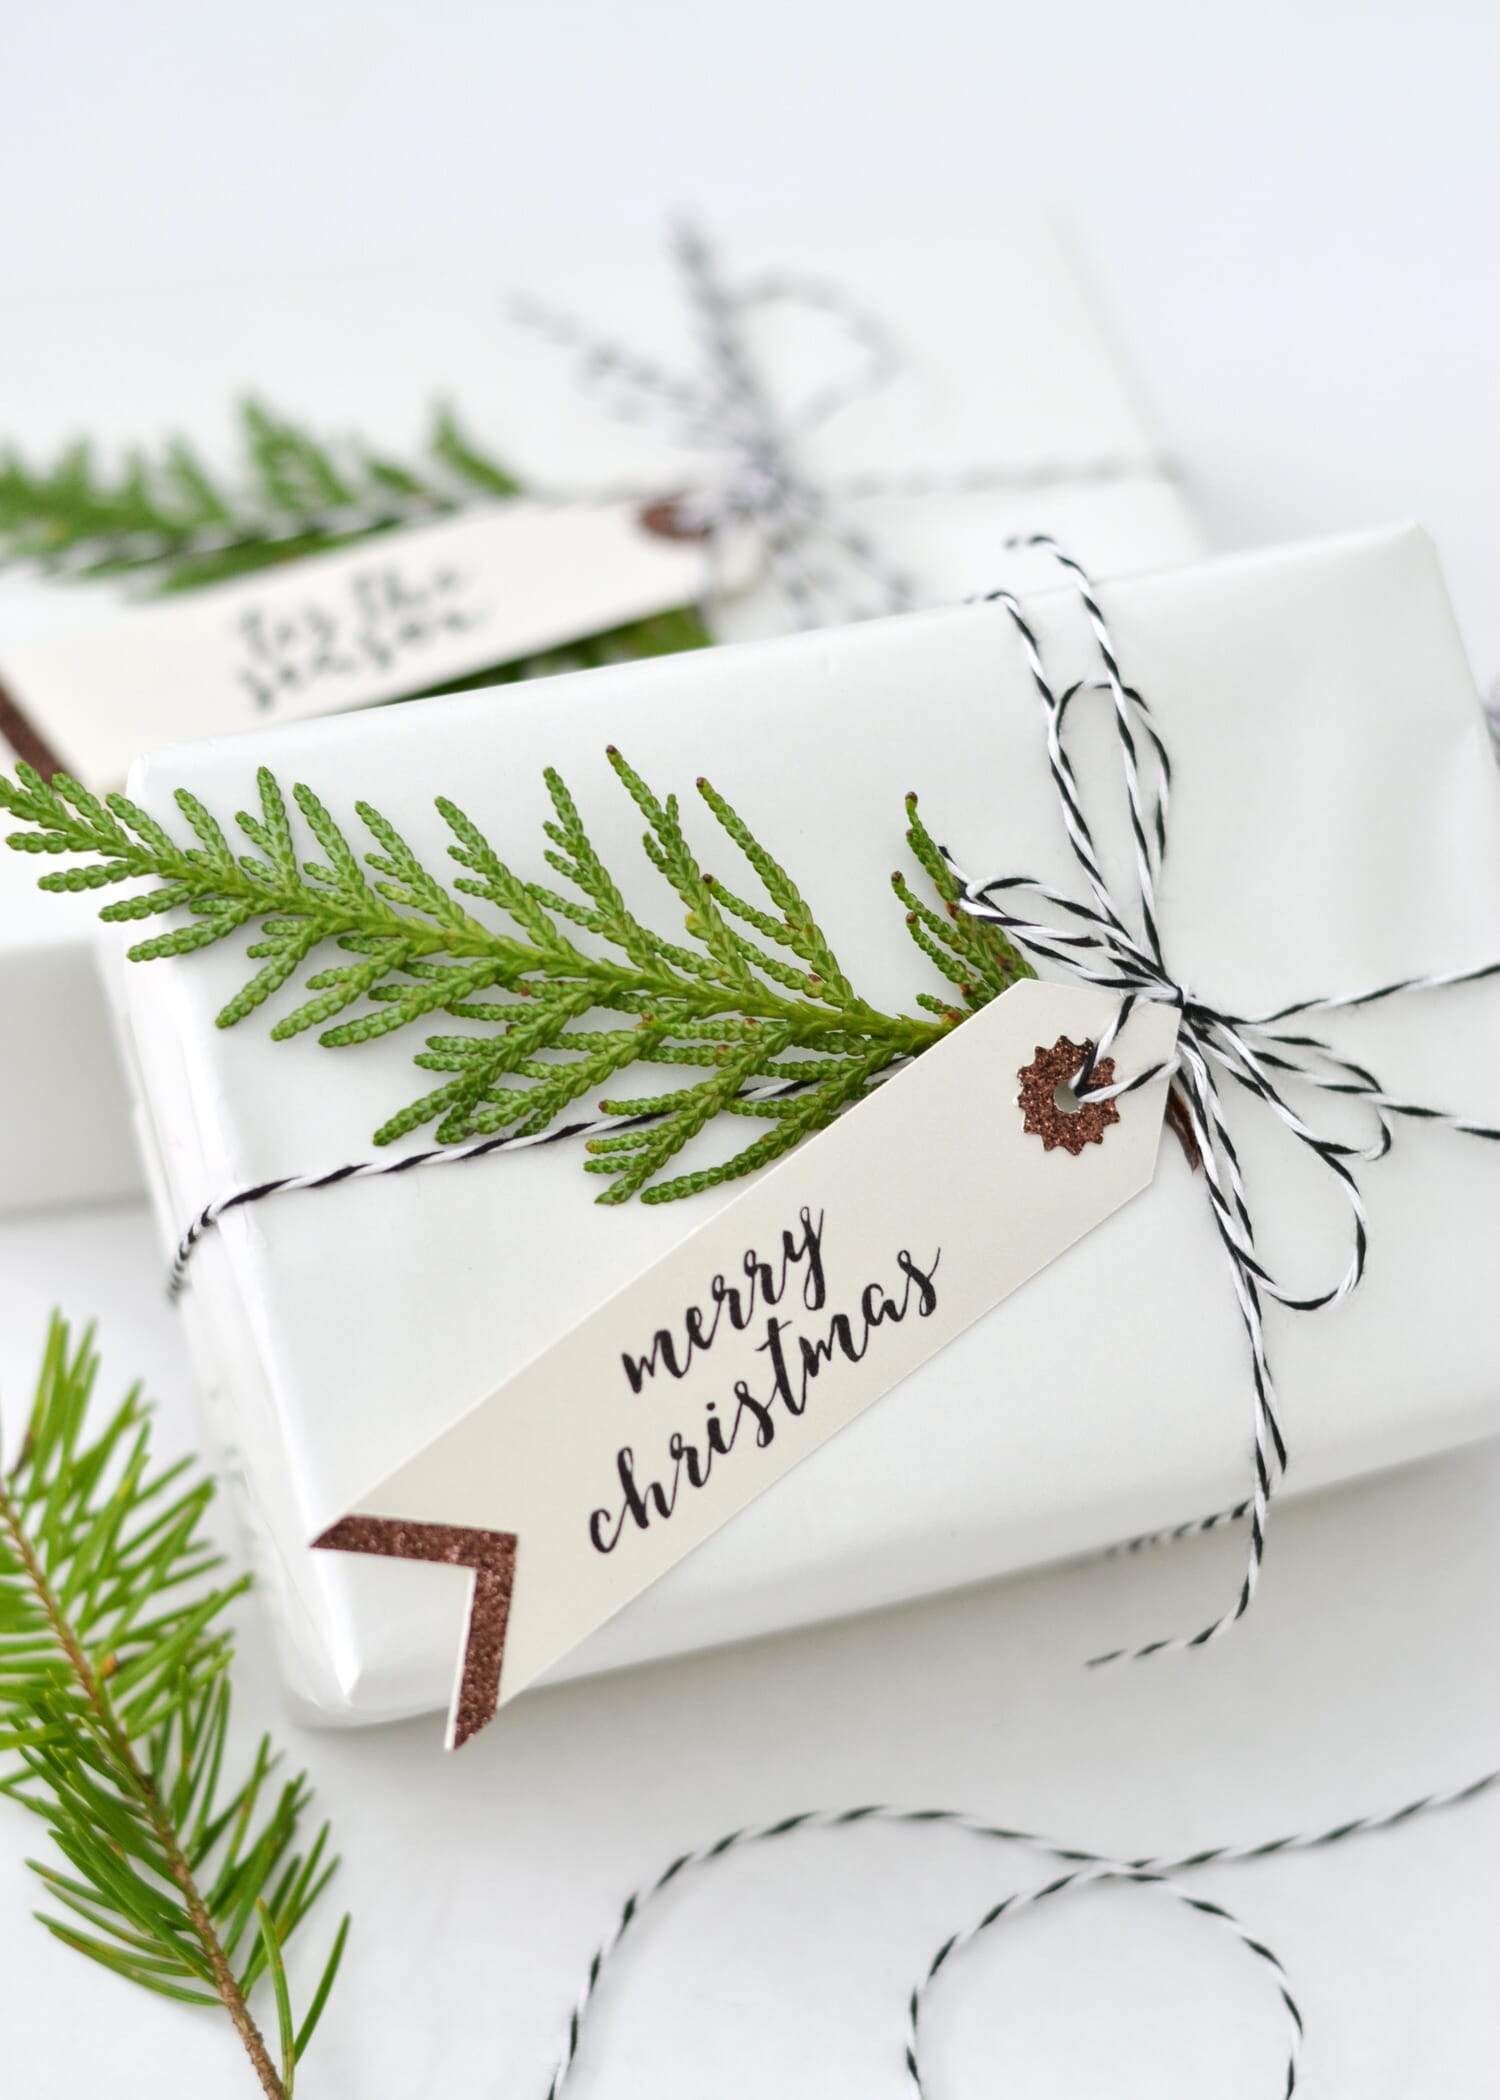 4 Quick Ways to Update Your Craft Space This Holiday Season